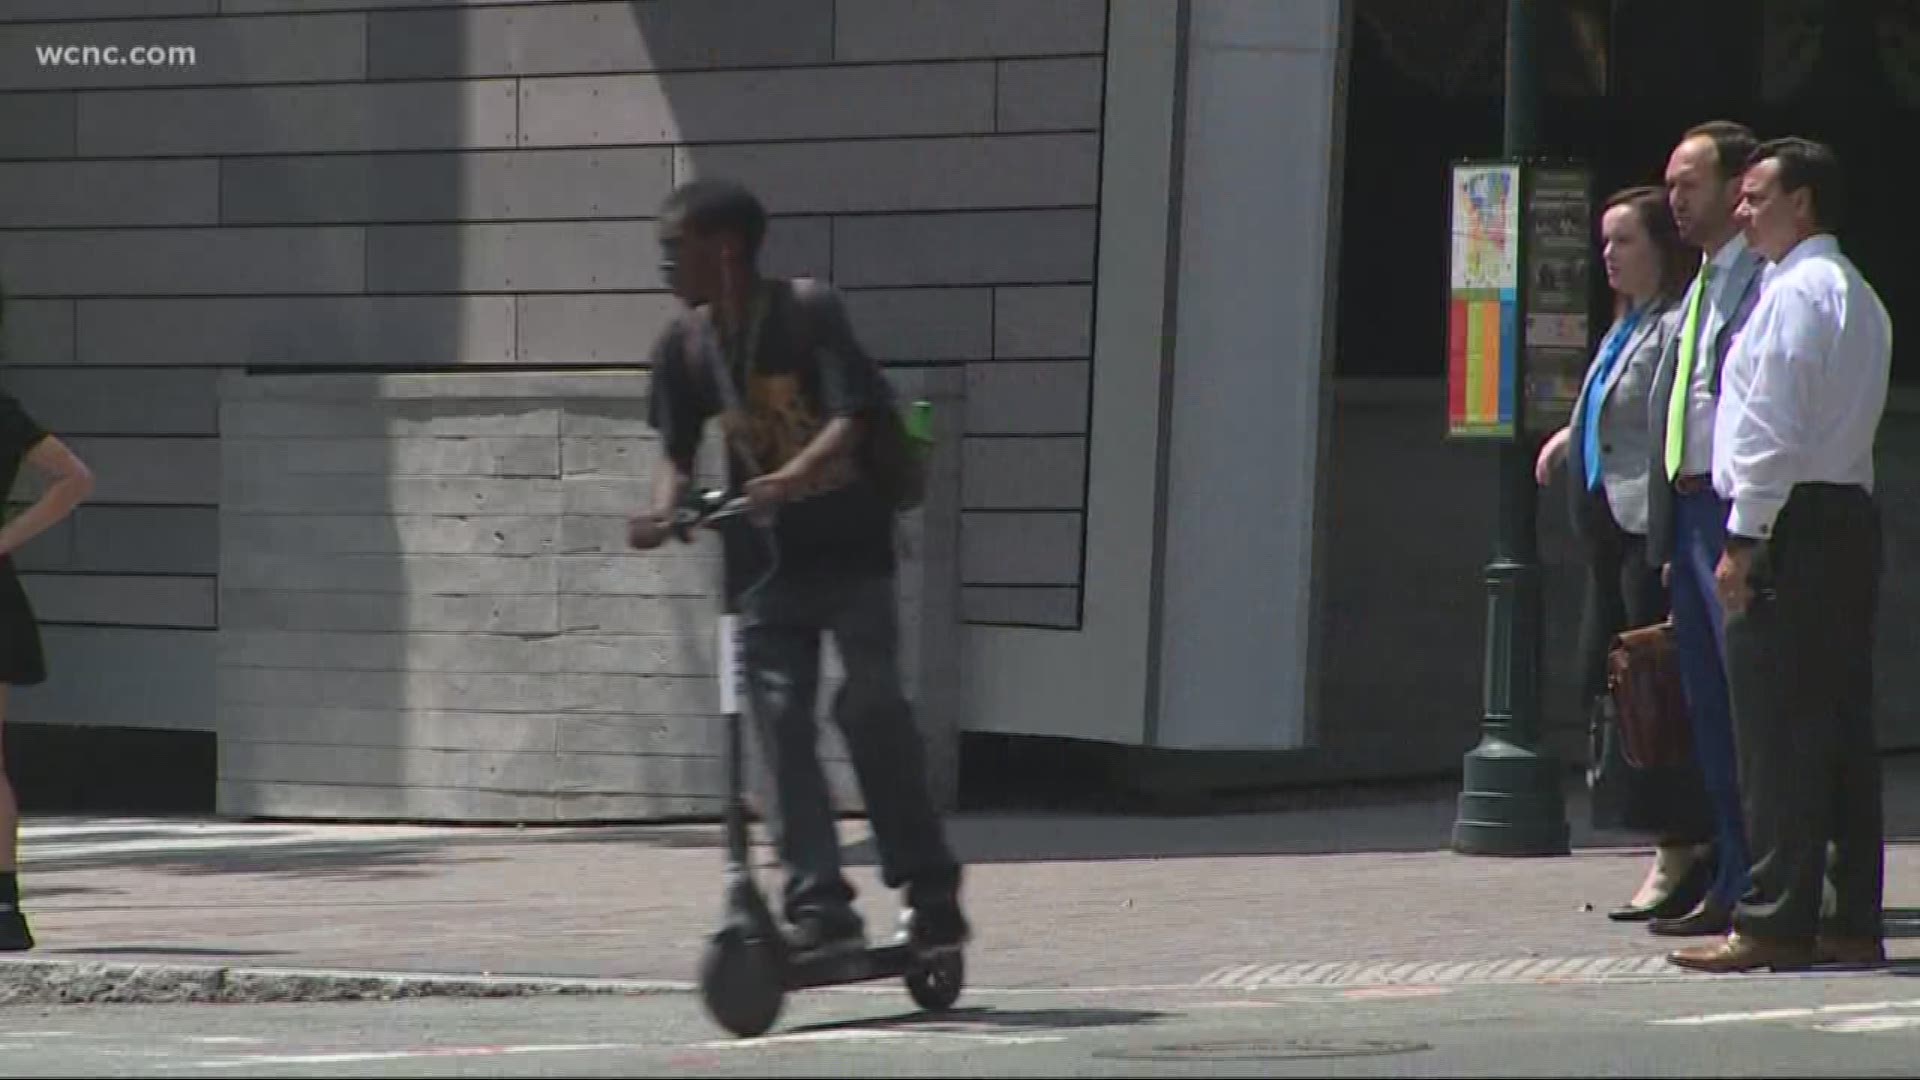 A Charlotte City Councilmember says the new battery-powered scooters need to be regulated or he says 'someone will die.'